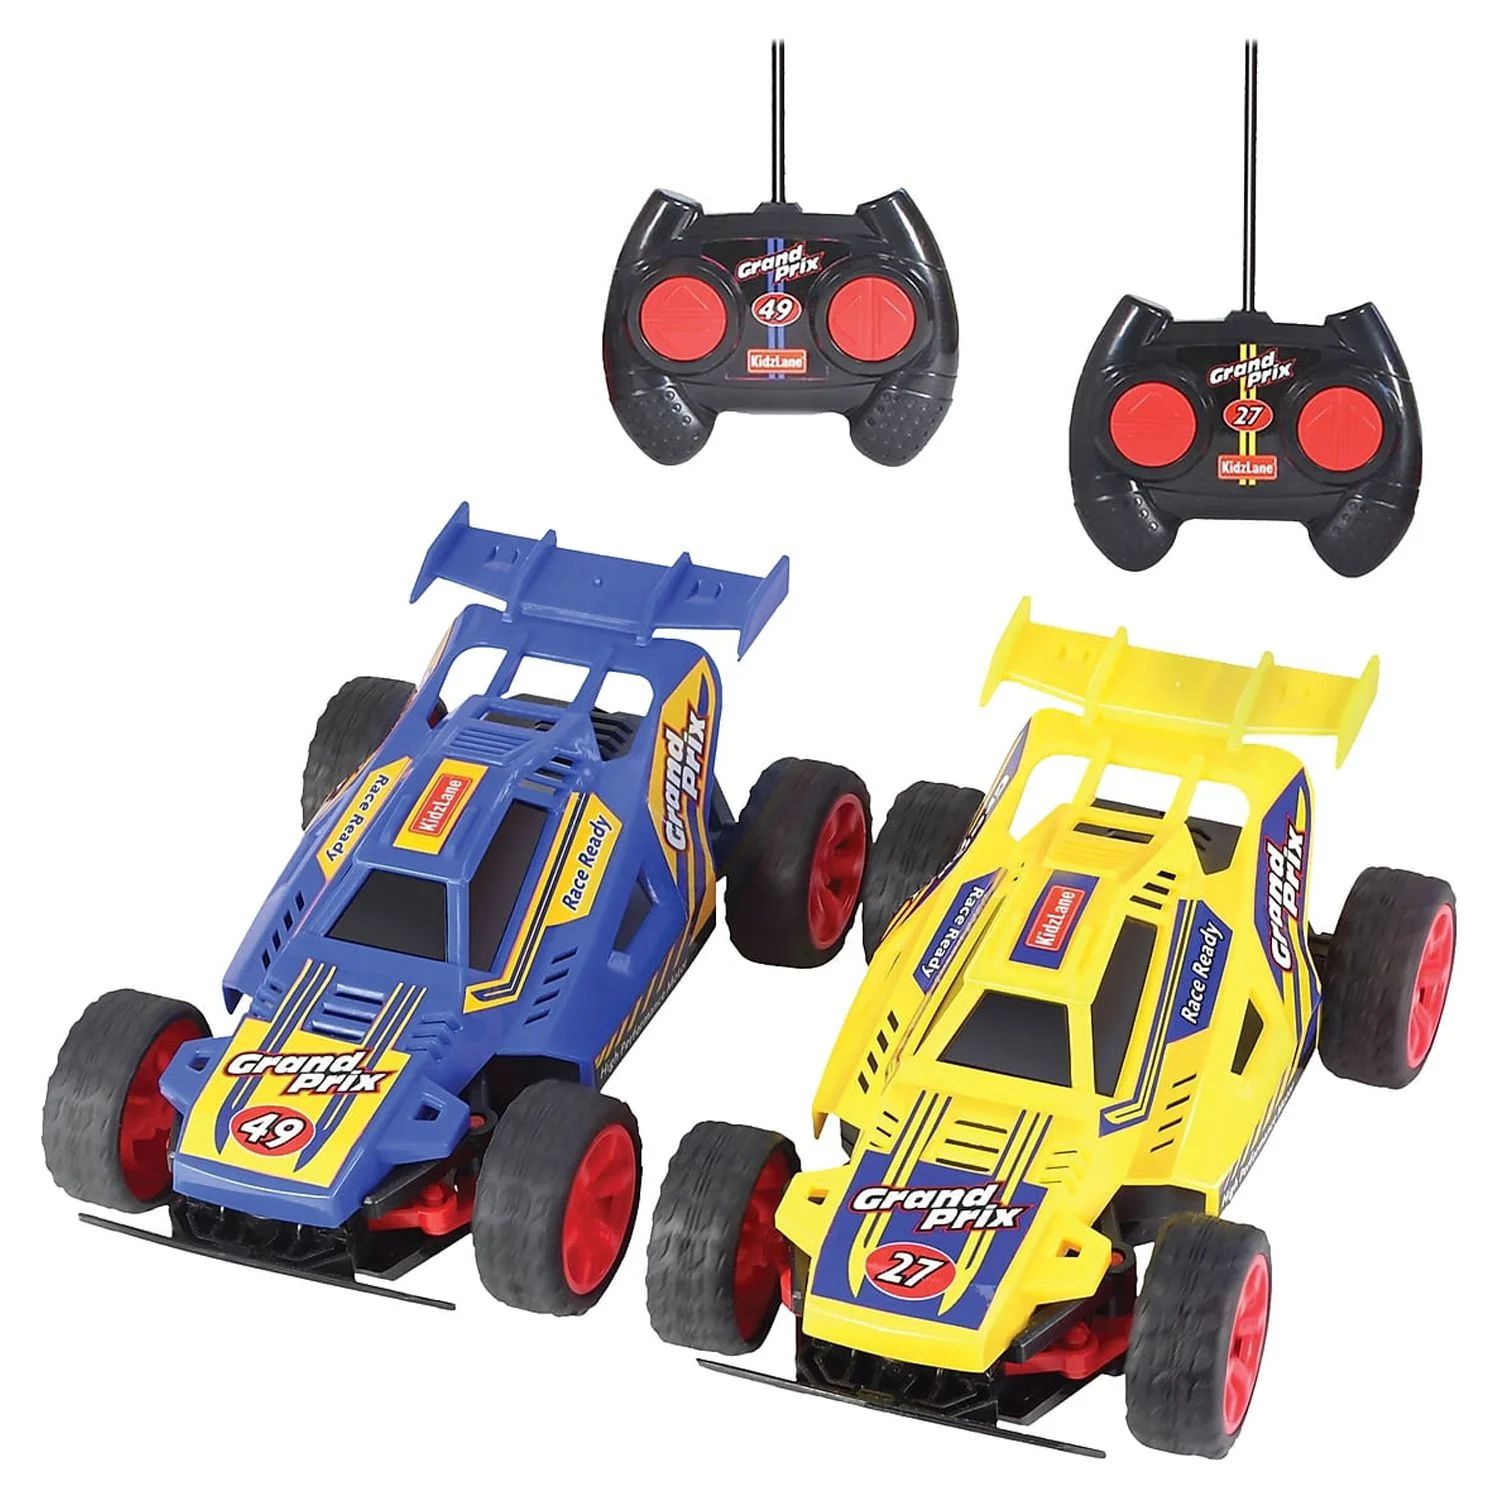 Kidzlane Kids Remote Control Cars - 2 Race Cars with All-Direction Drive, 35 ft Range - Remote Co... | Walmart (US)